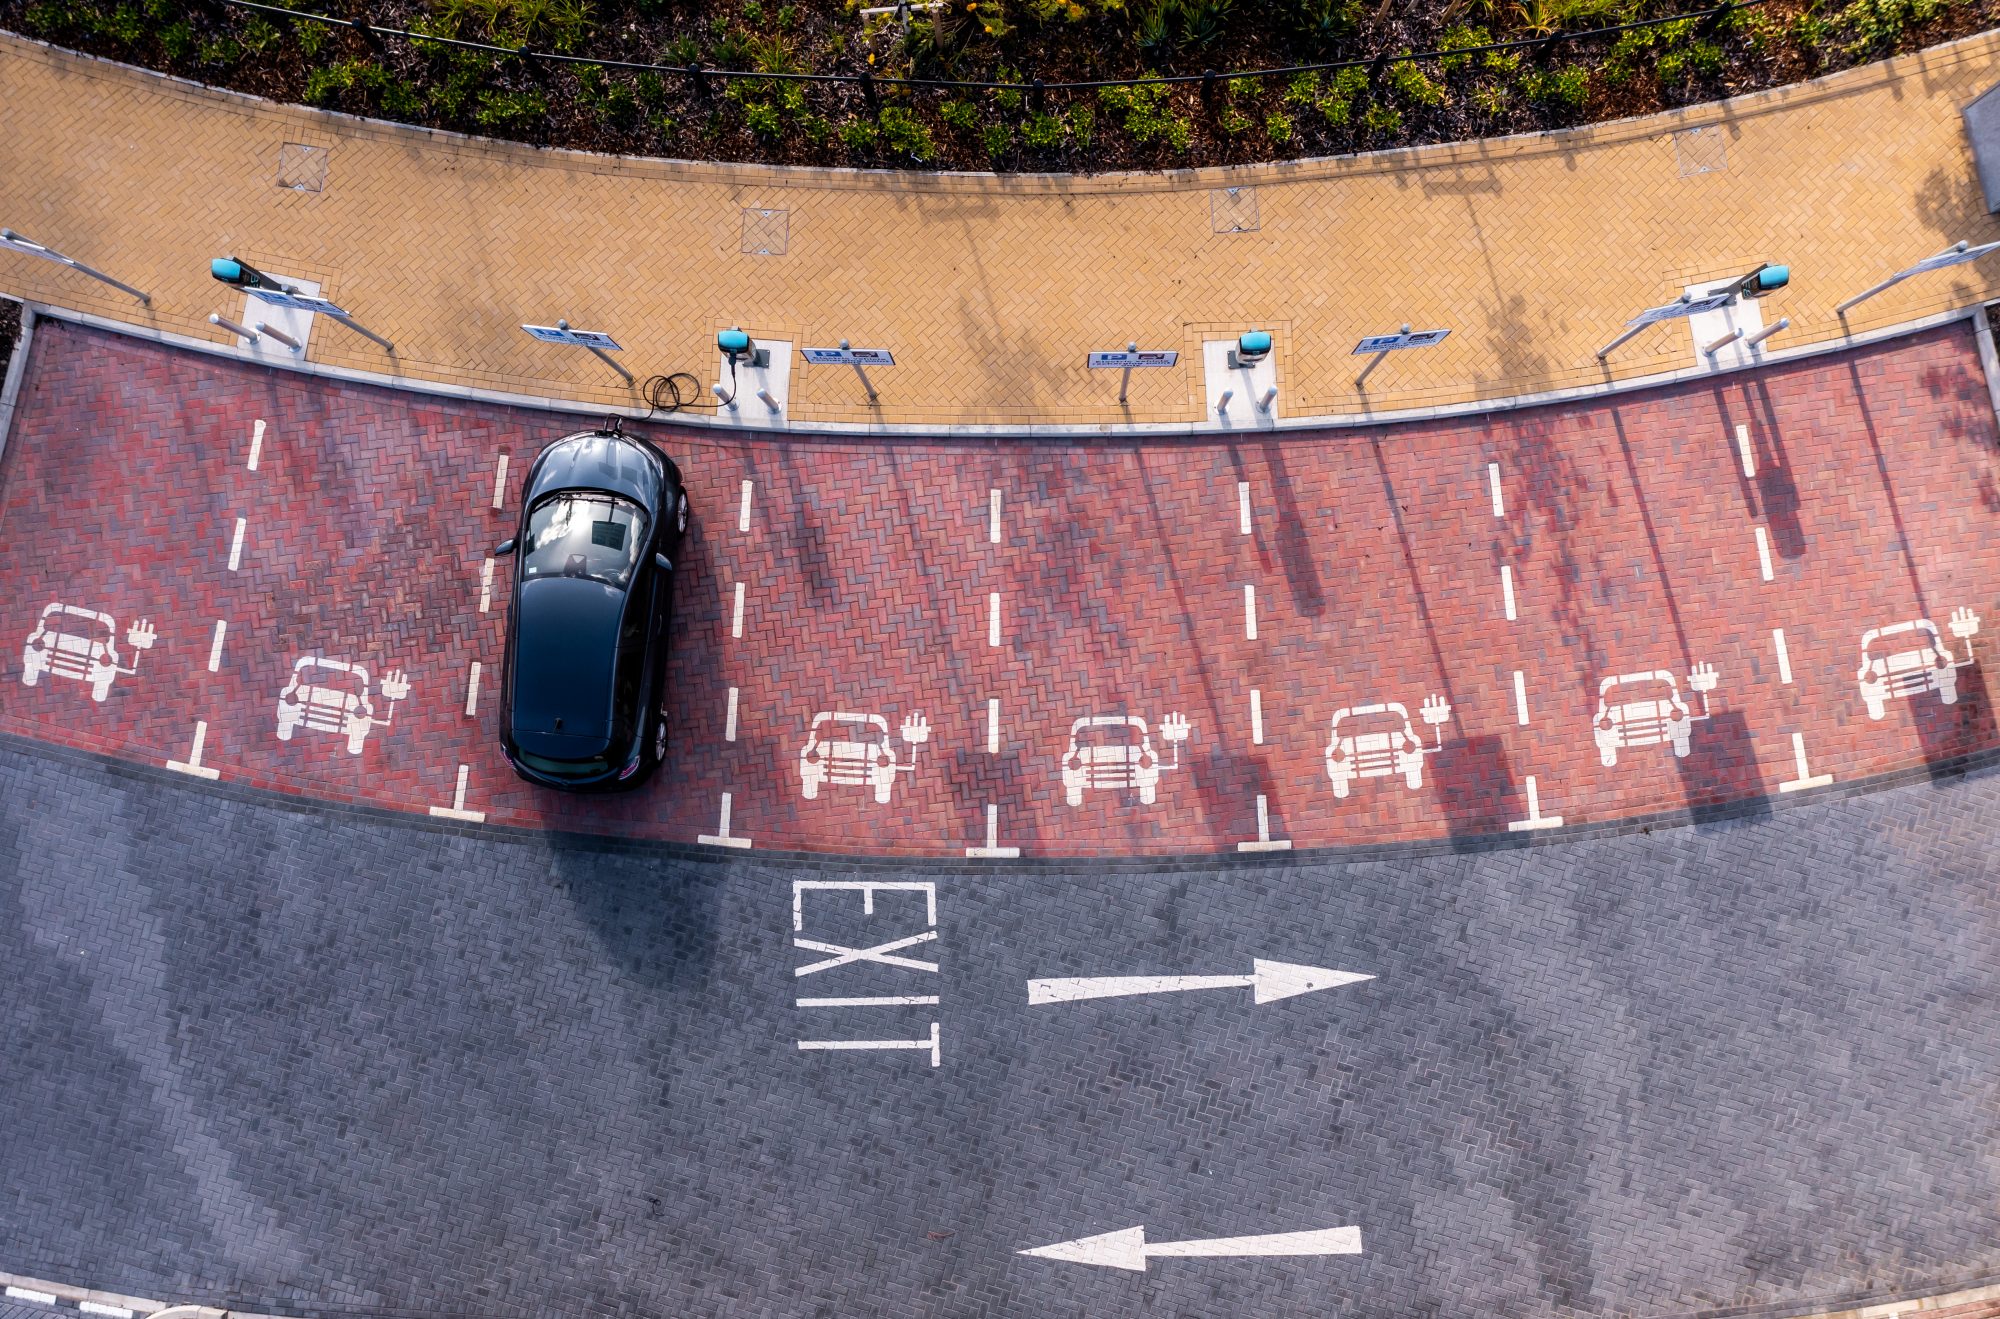 An aerial view directly above an electric vehicle charging station with electric car charging in a parking space